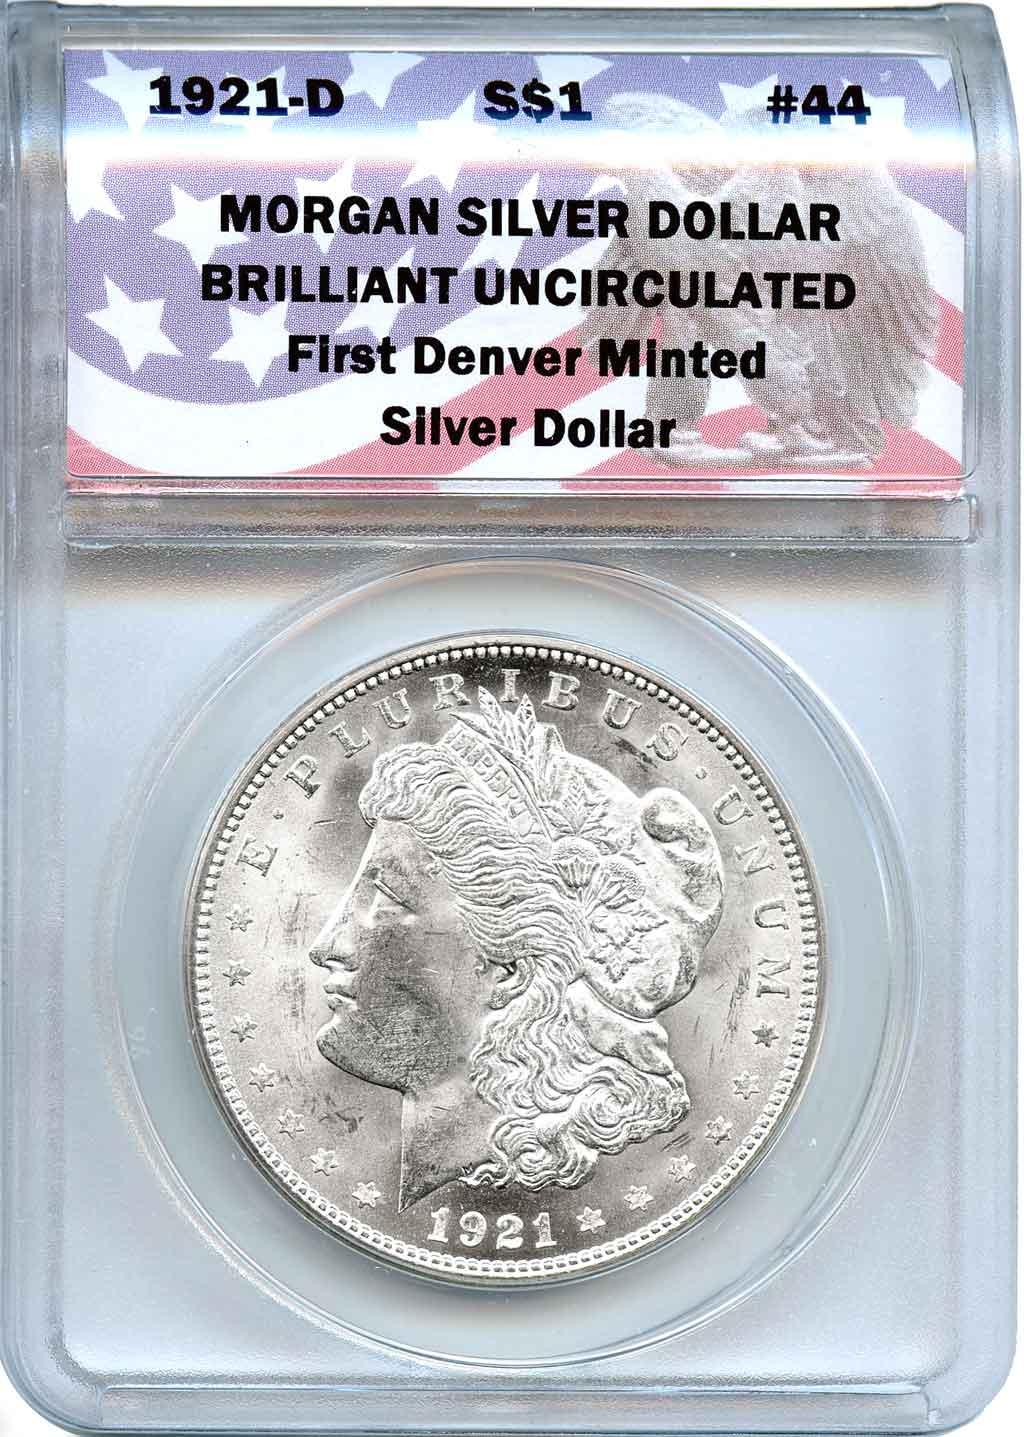 CollecTons Keepers #44: 1921-D Morgan Silver Dollar Certified in Exclusive ANACS Brilliant Uncirculated Holder